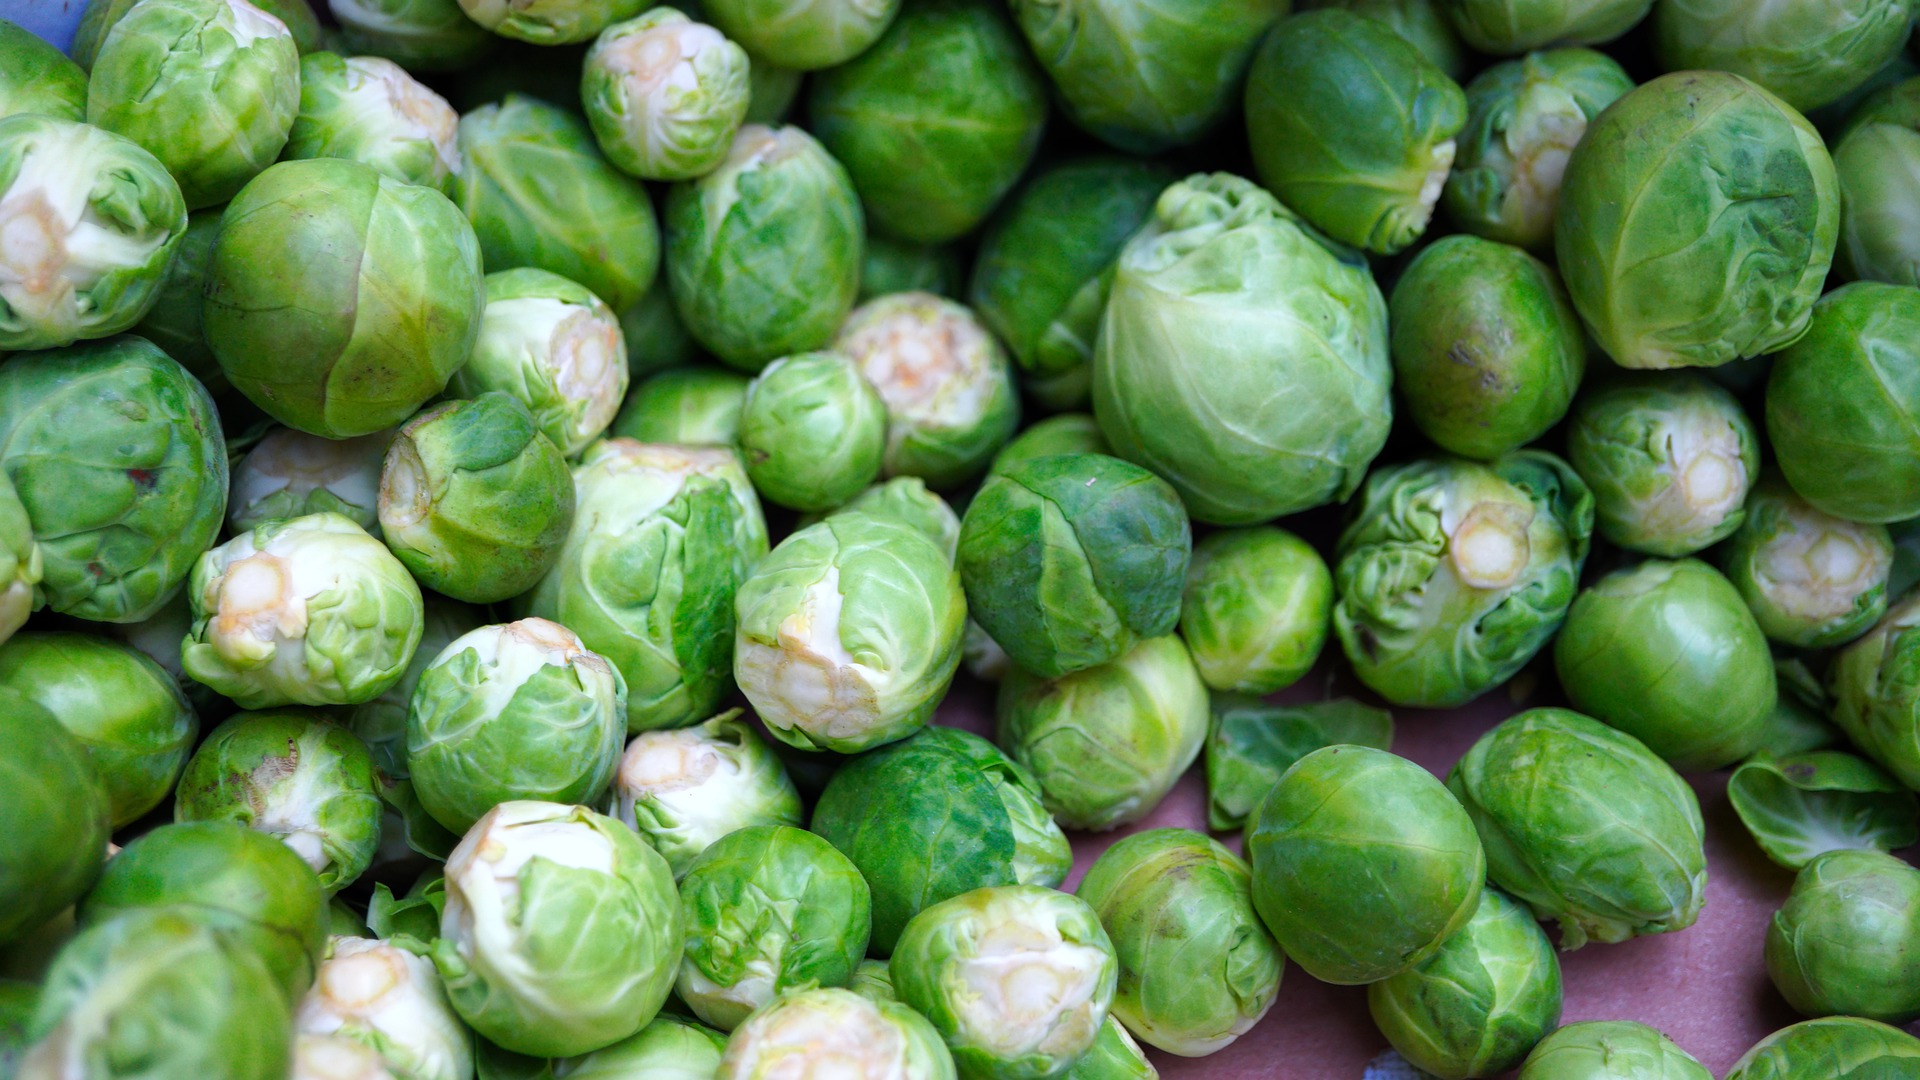 brussels-sprouts-gefb6fa717_1920